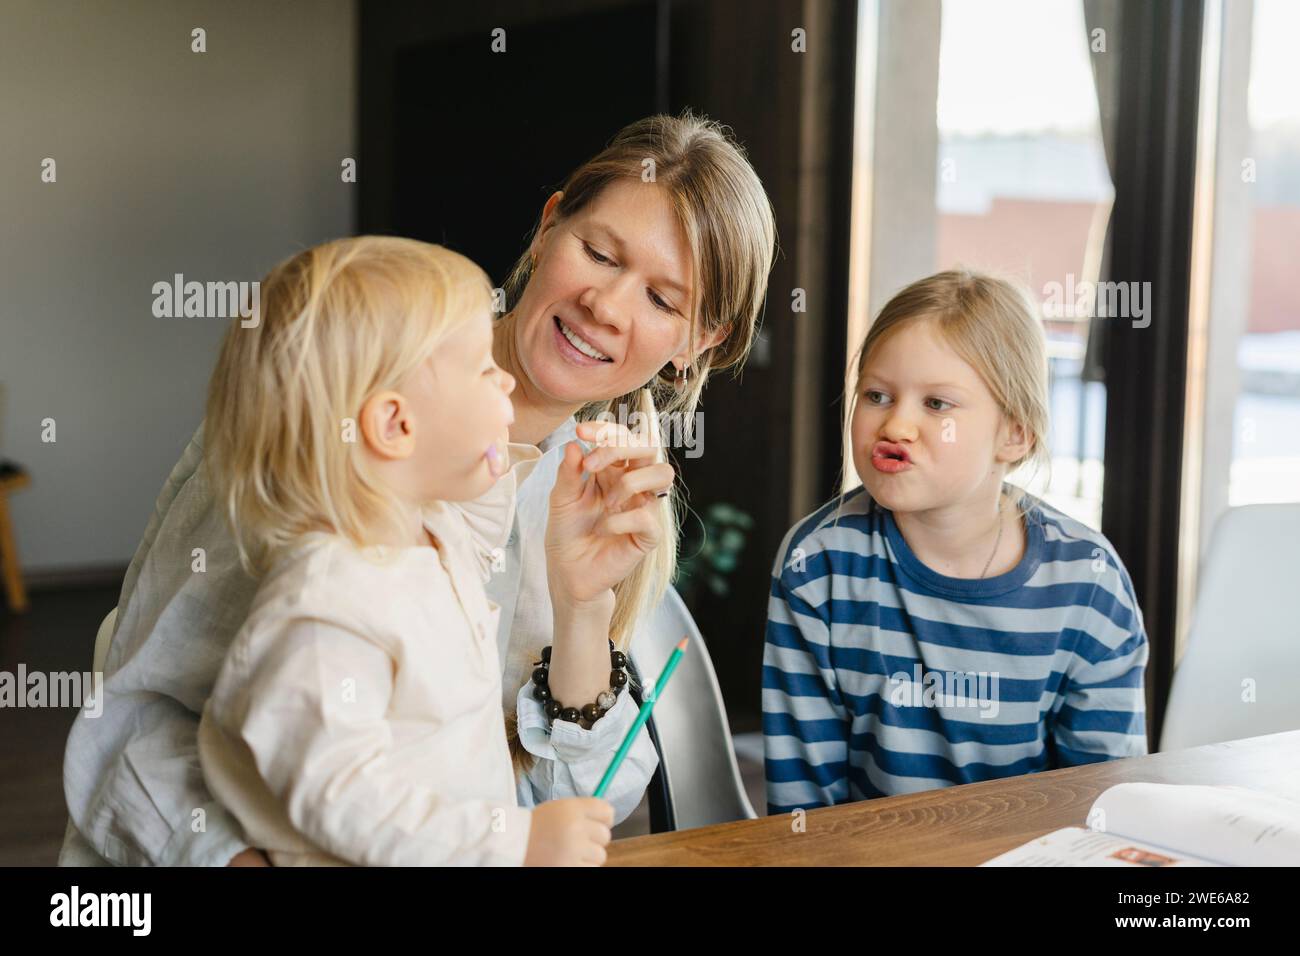 Woman spending leisure time with daughters at home Stock Photo